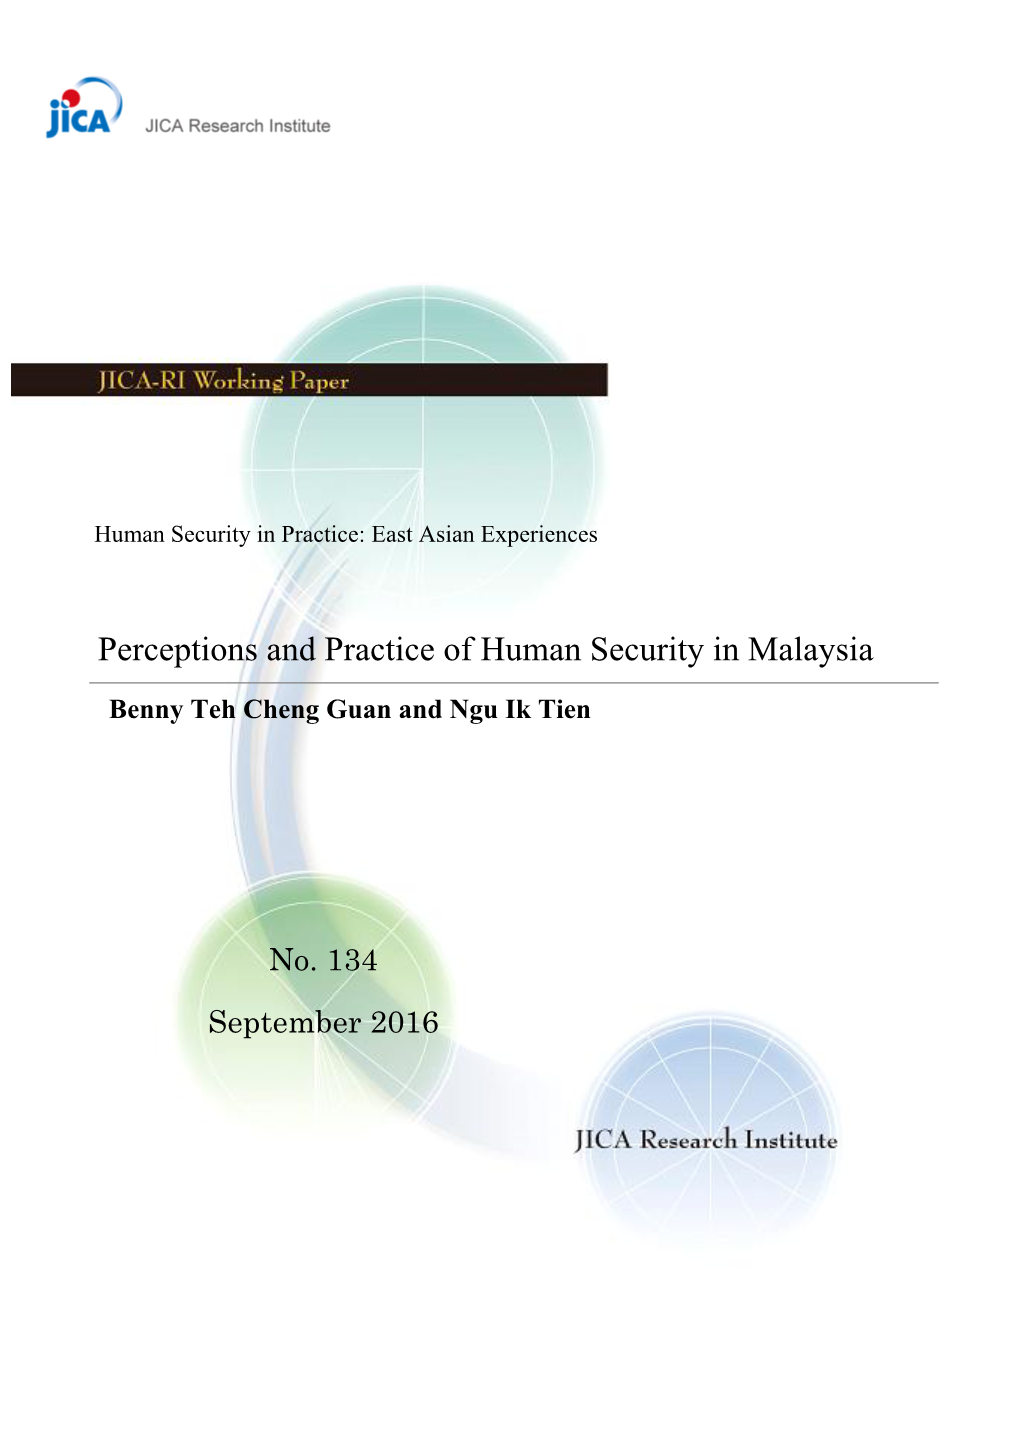 Perceptions and Practice of Human Security in Malaysia